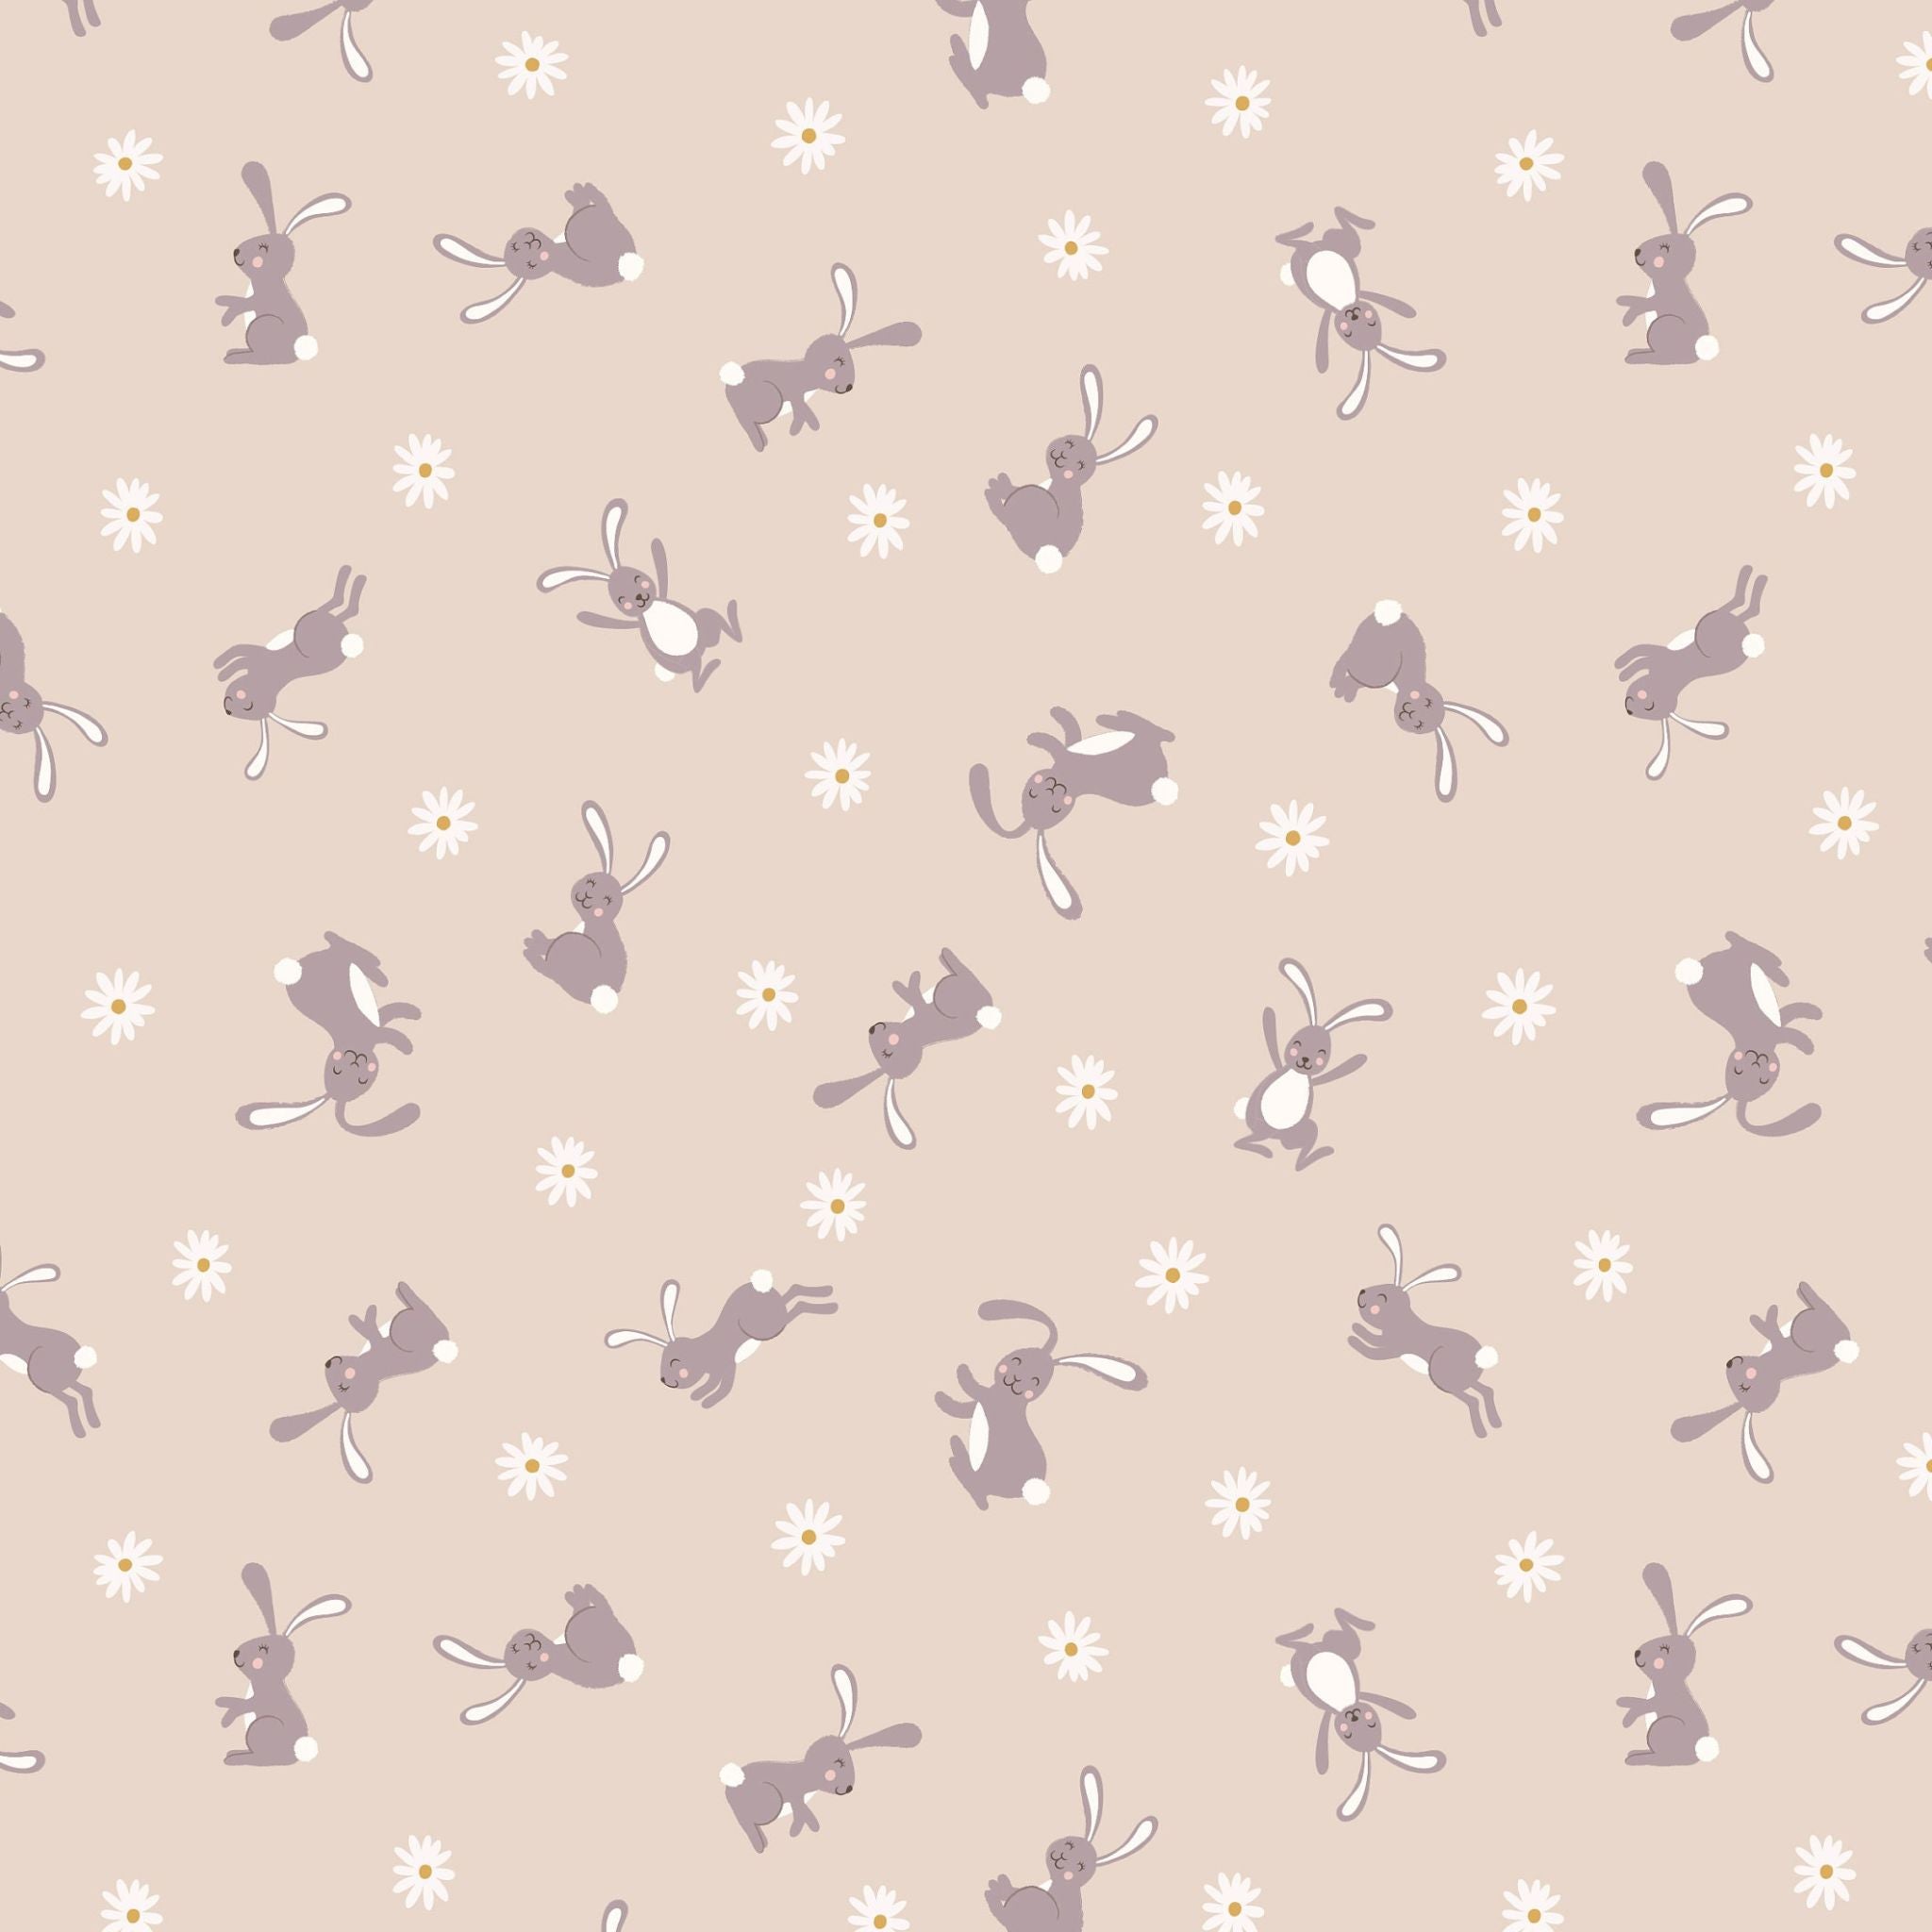 Bunny rabbits and daisies on dark cream cotton fabric by Lewis and Irene